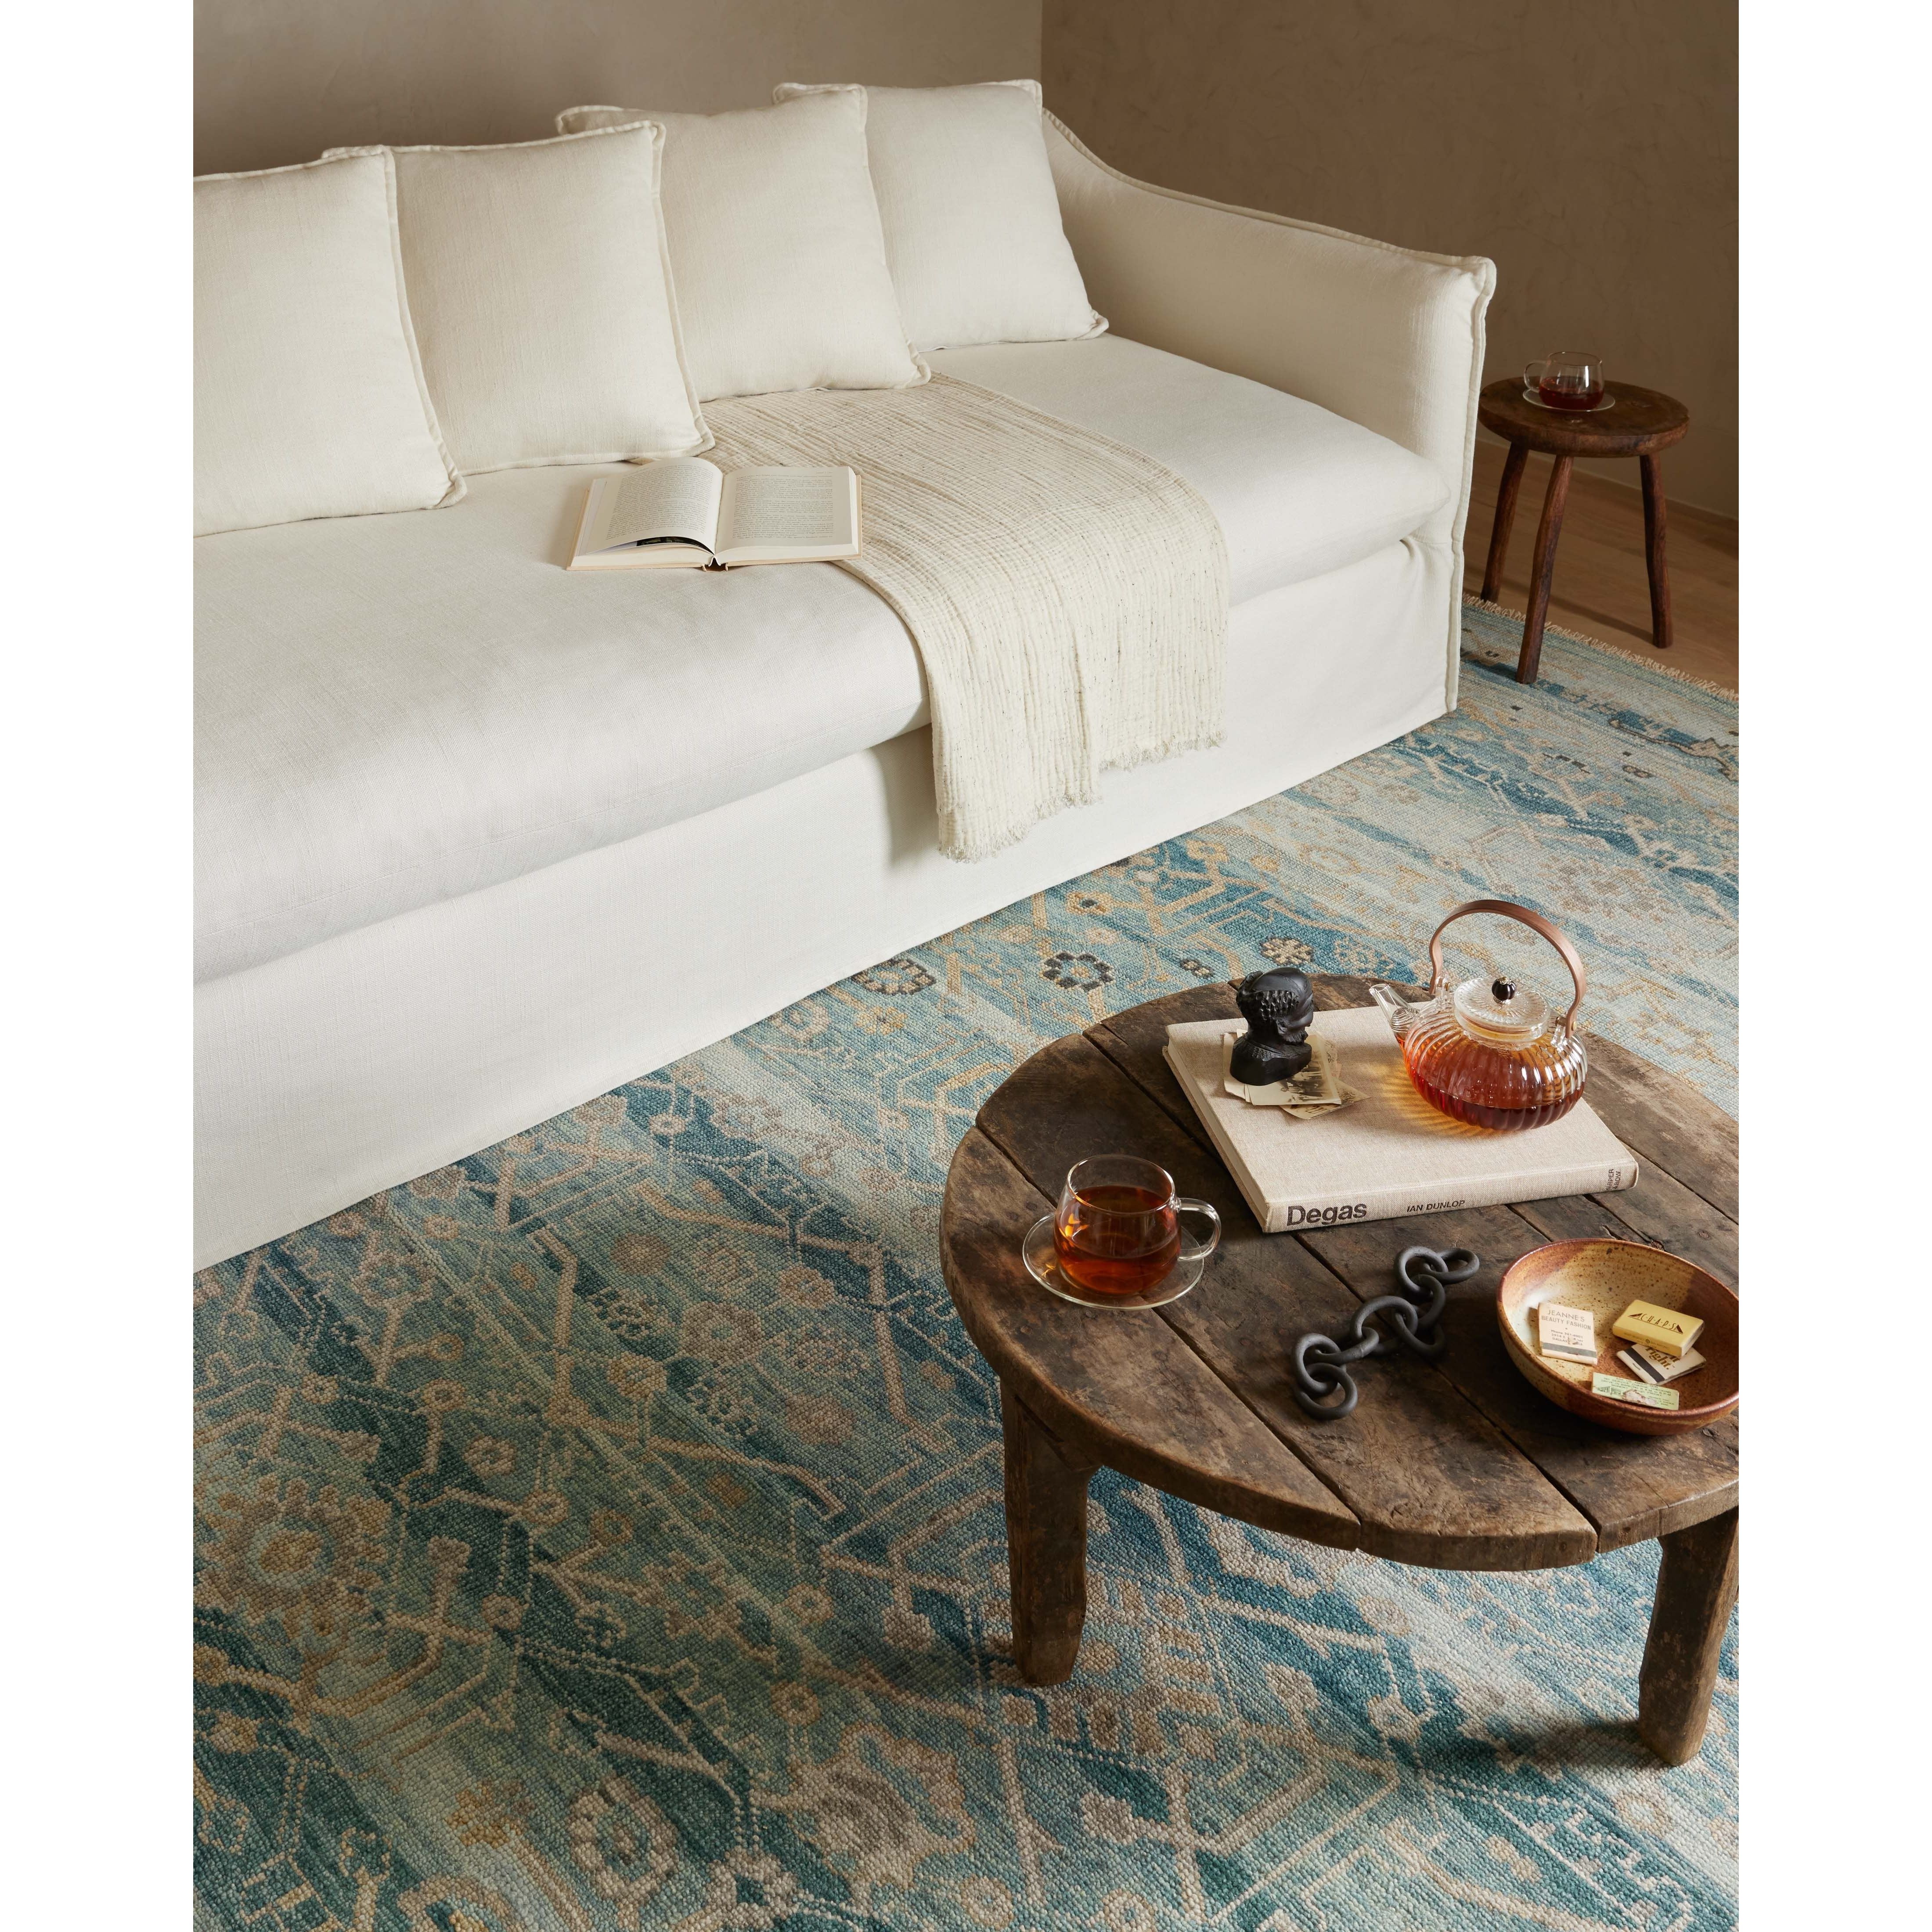 The hand-knotted Dominic Collection features loose, freeform motifs that give the rug a sense of depth and romance. Dominic’s shade-shifting palette is based on the horizontal lines of varying tones you’d encounter in antique Persian rugs. This GoodWeave certified collection is made of wool and cotton in India, ensuring our commitment to ethical production and the support of weavers’ communities.Amethyst Home provides interior design, new construction, custom furniture, and rugs for Portland metro area